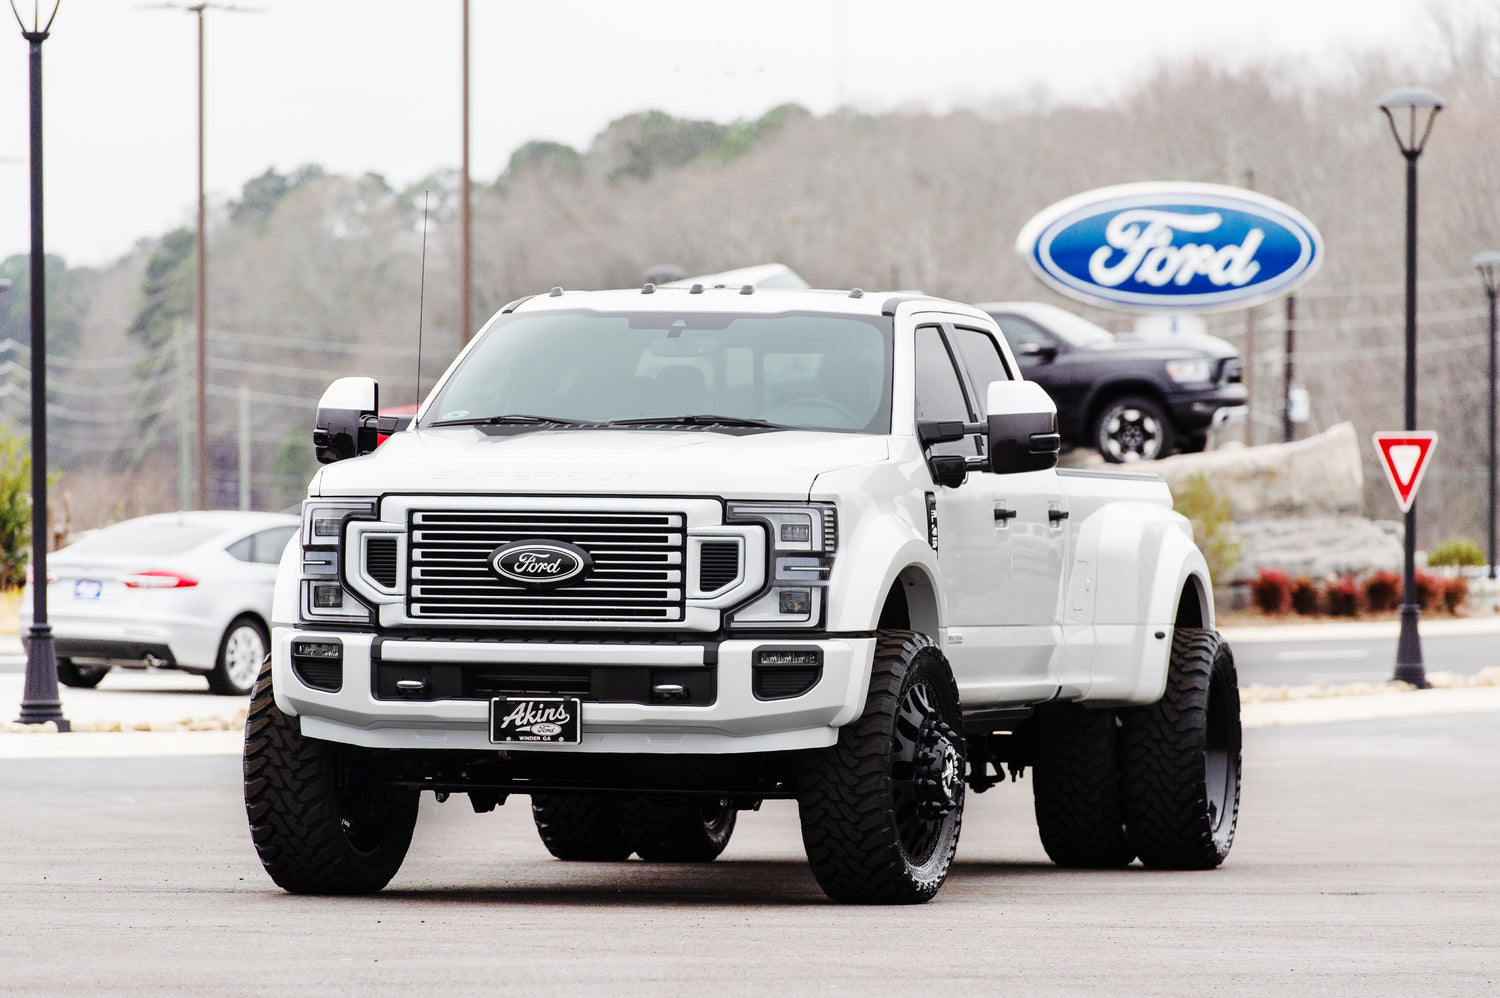 2020 White Ford F450 Everest™ Edition